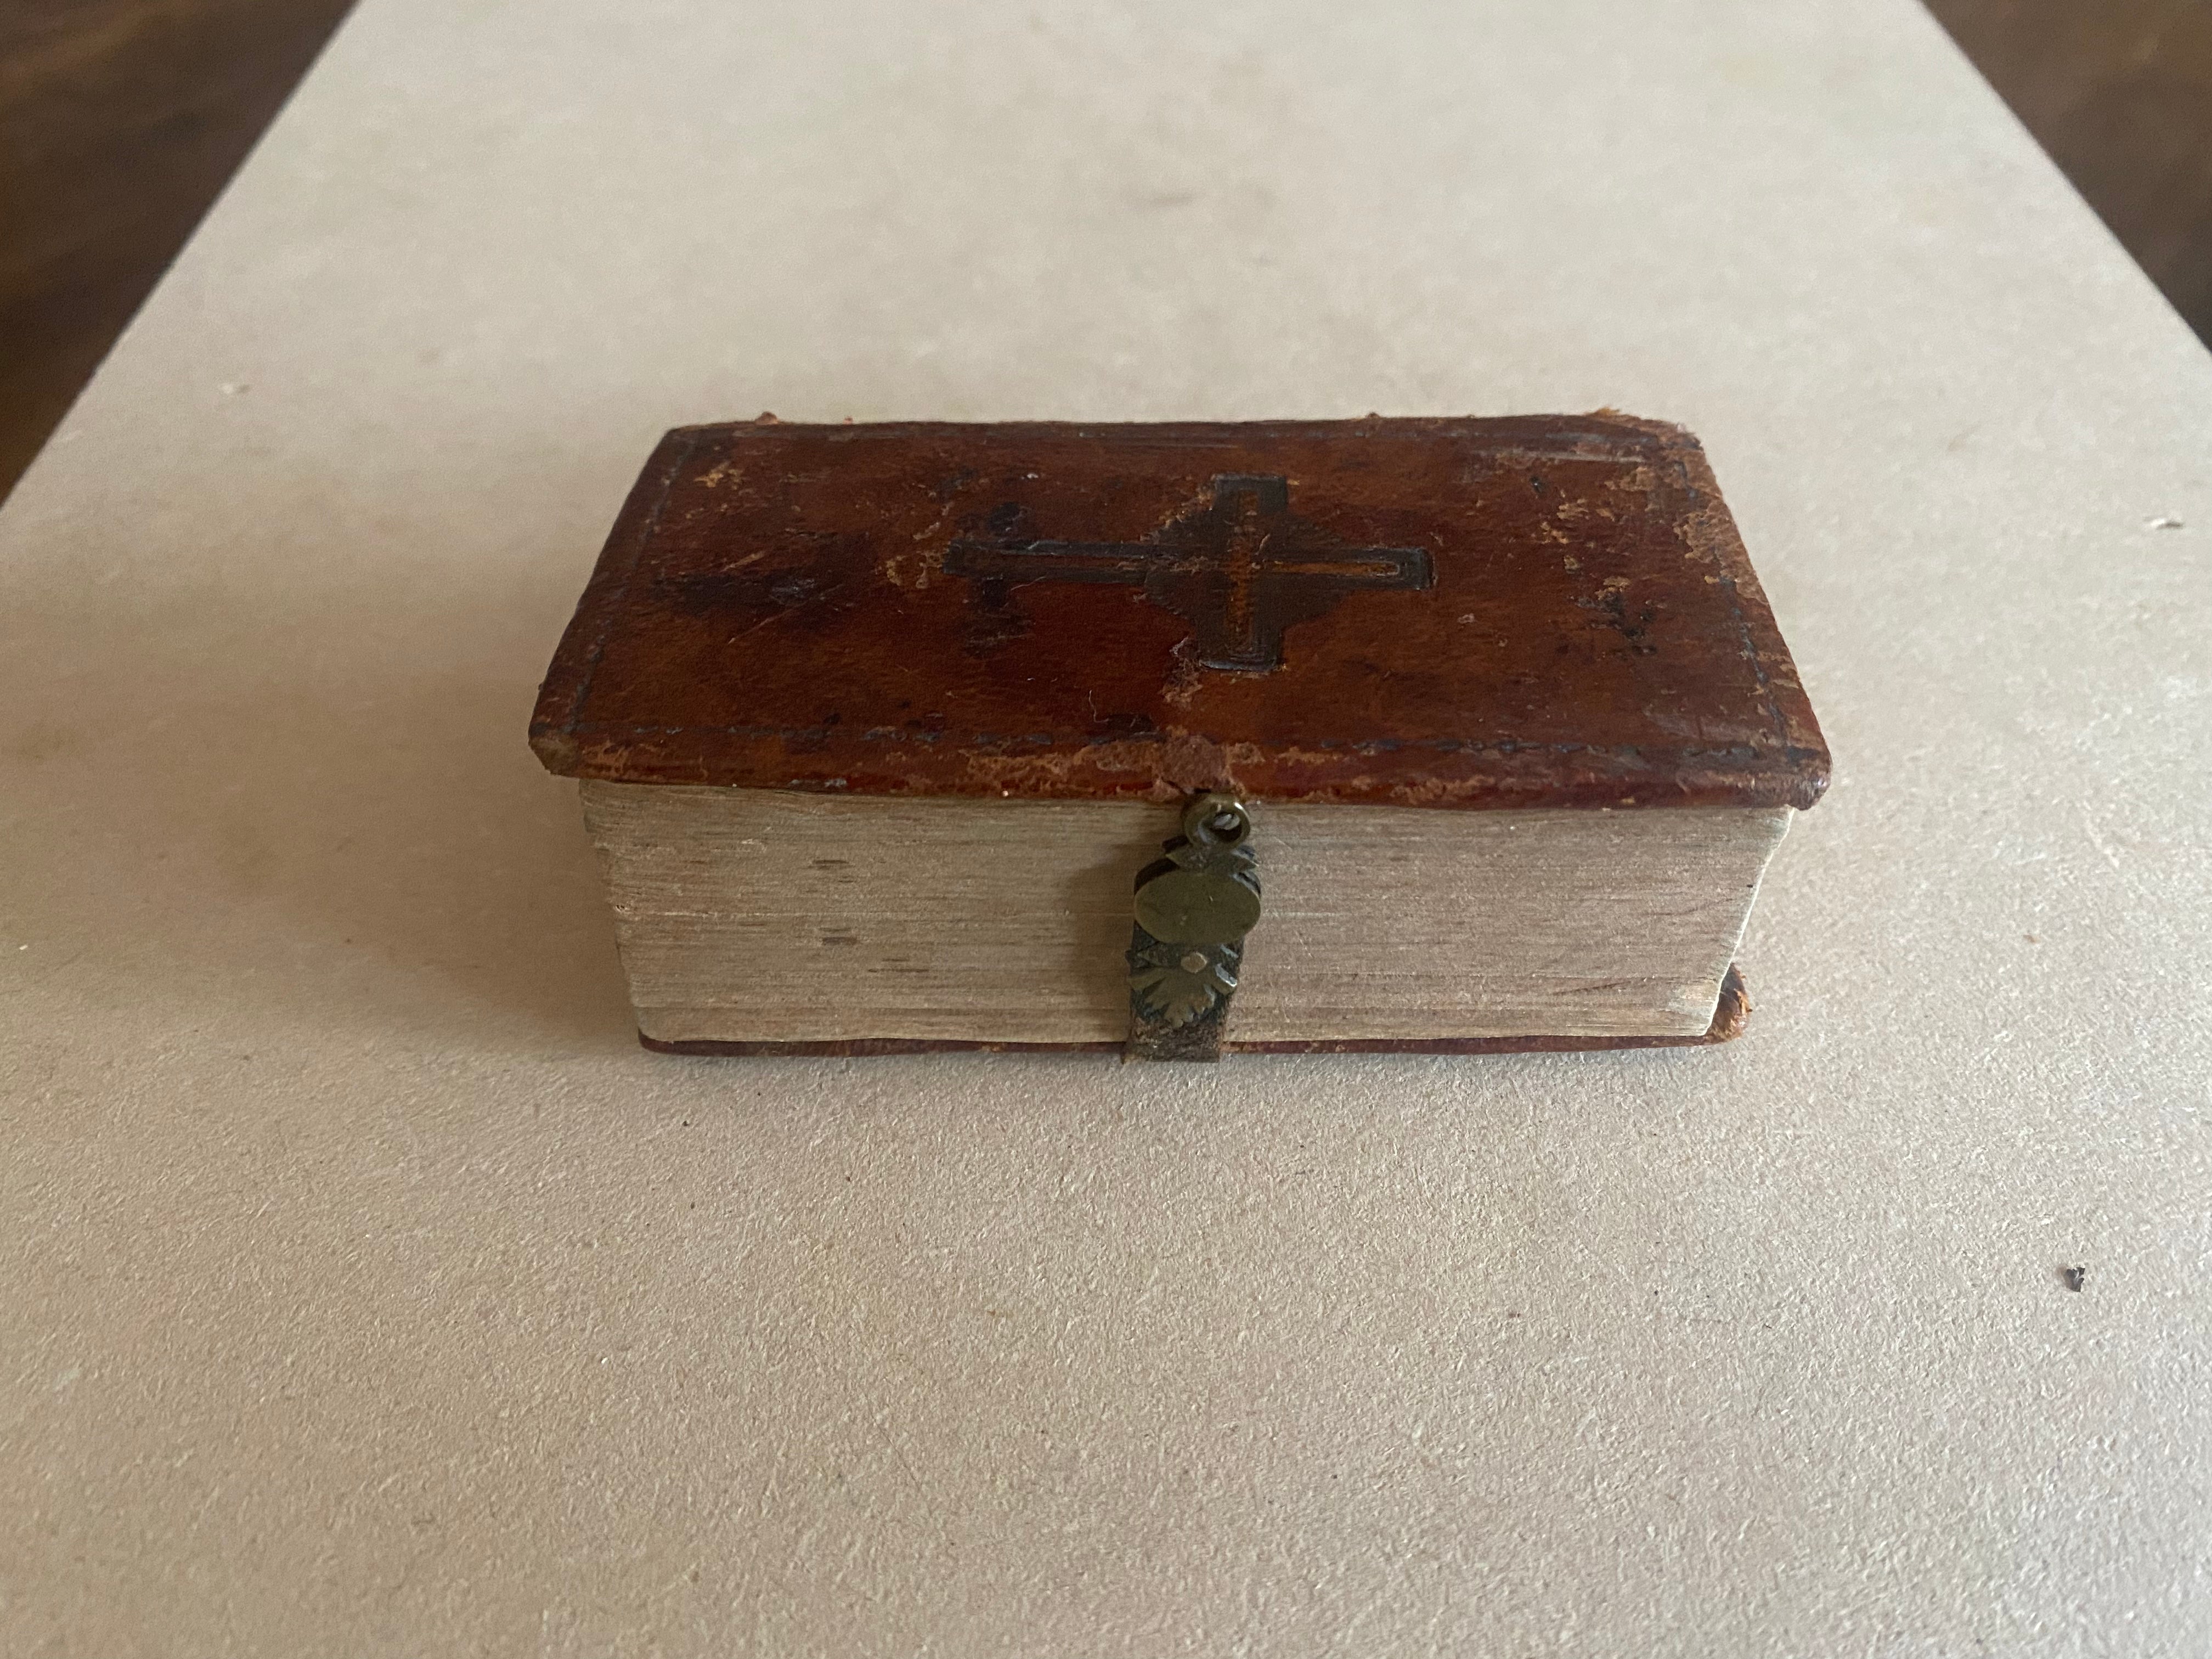 Antique miniature book, Old Testament “ PROPHETAE “ by Apud Bernard Gualteri 1632 Colonia Agrippina ( Cologne, Germany ).